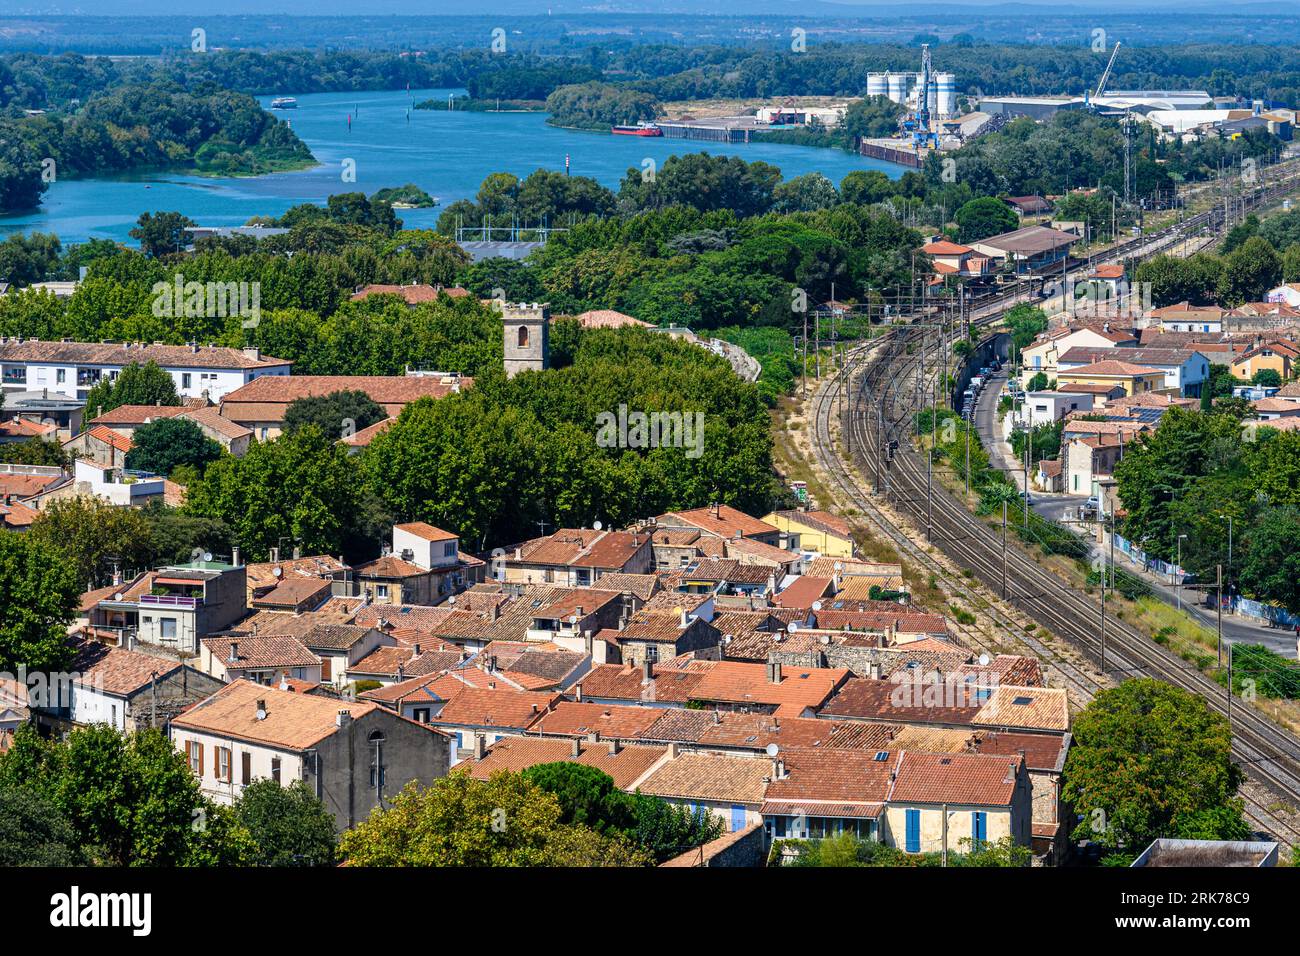 Landscape Photo Looking over the city of Arle for the Luma Tower. Stock Photo